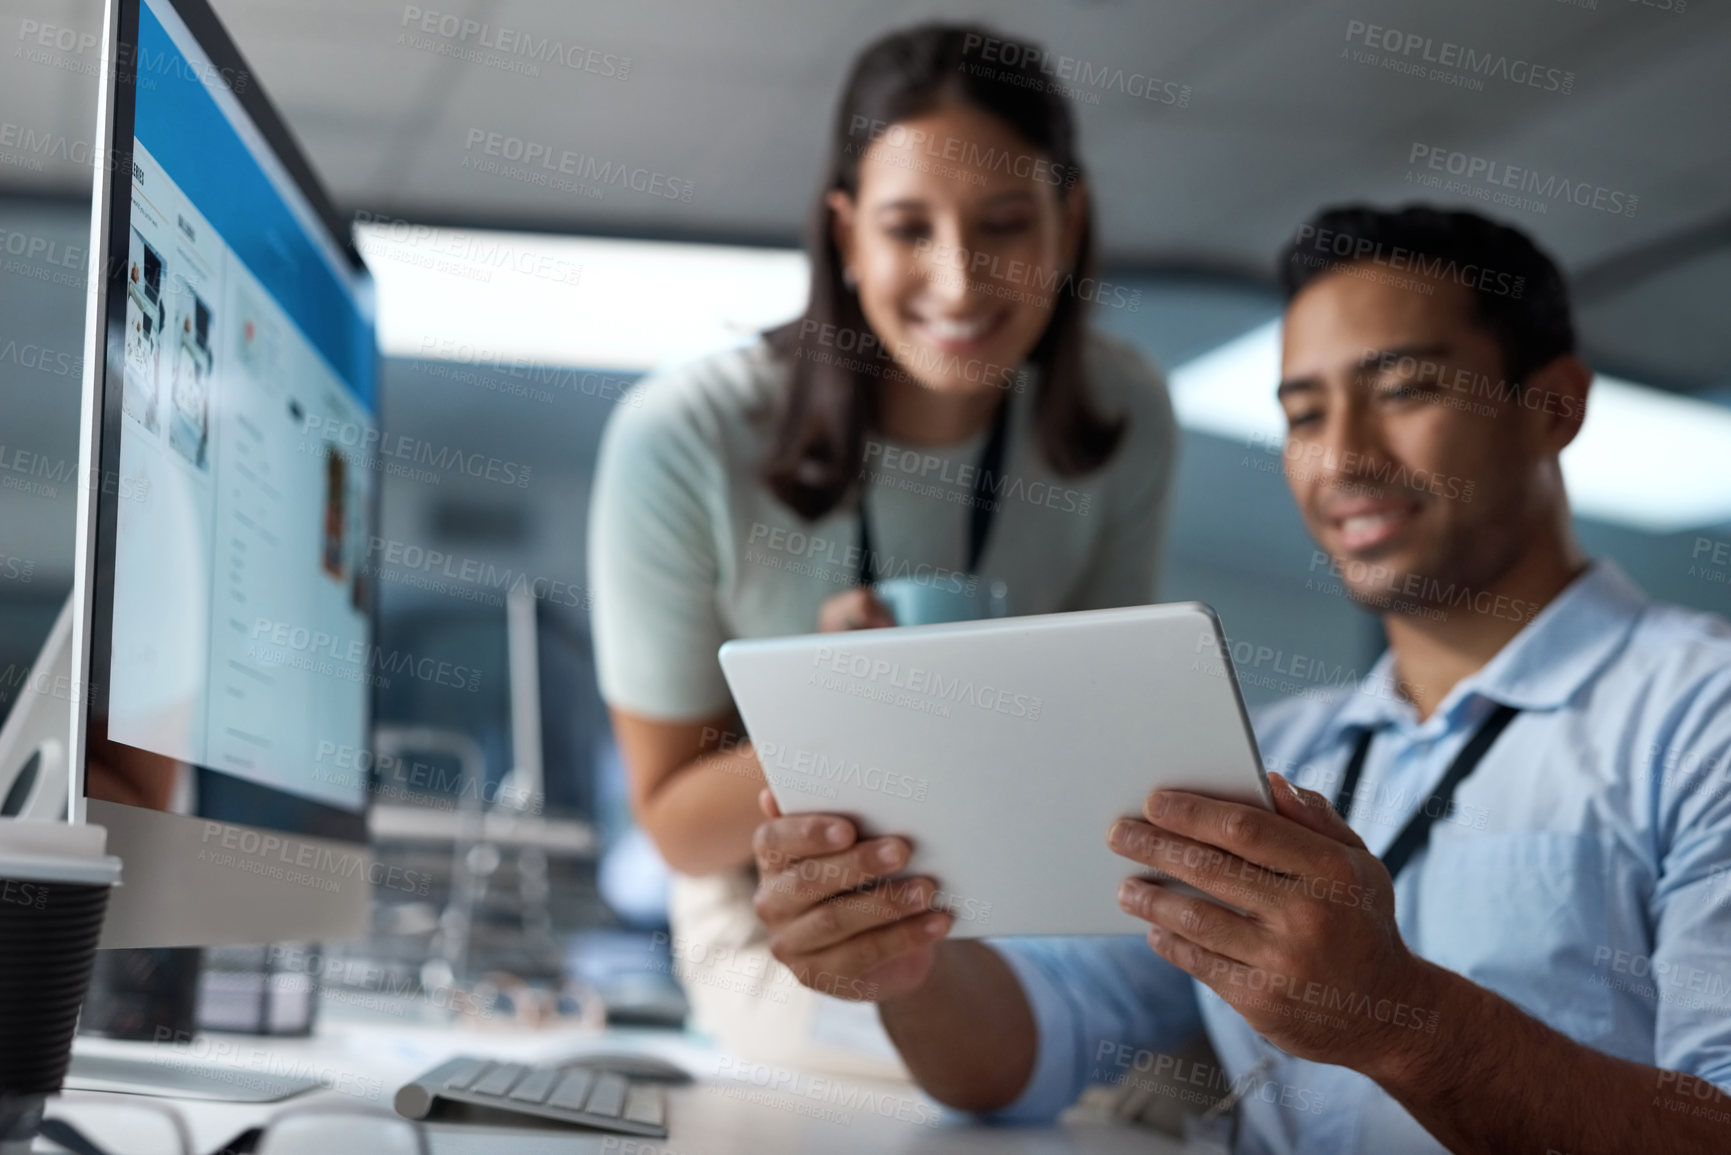 Buy stock photo Shot of a young businessman and businesswoman using a digital tablet in a modern office